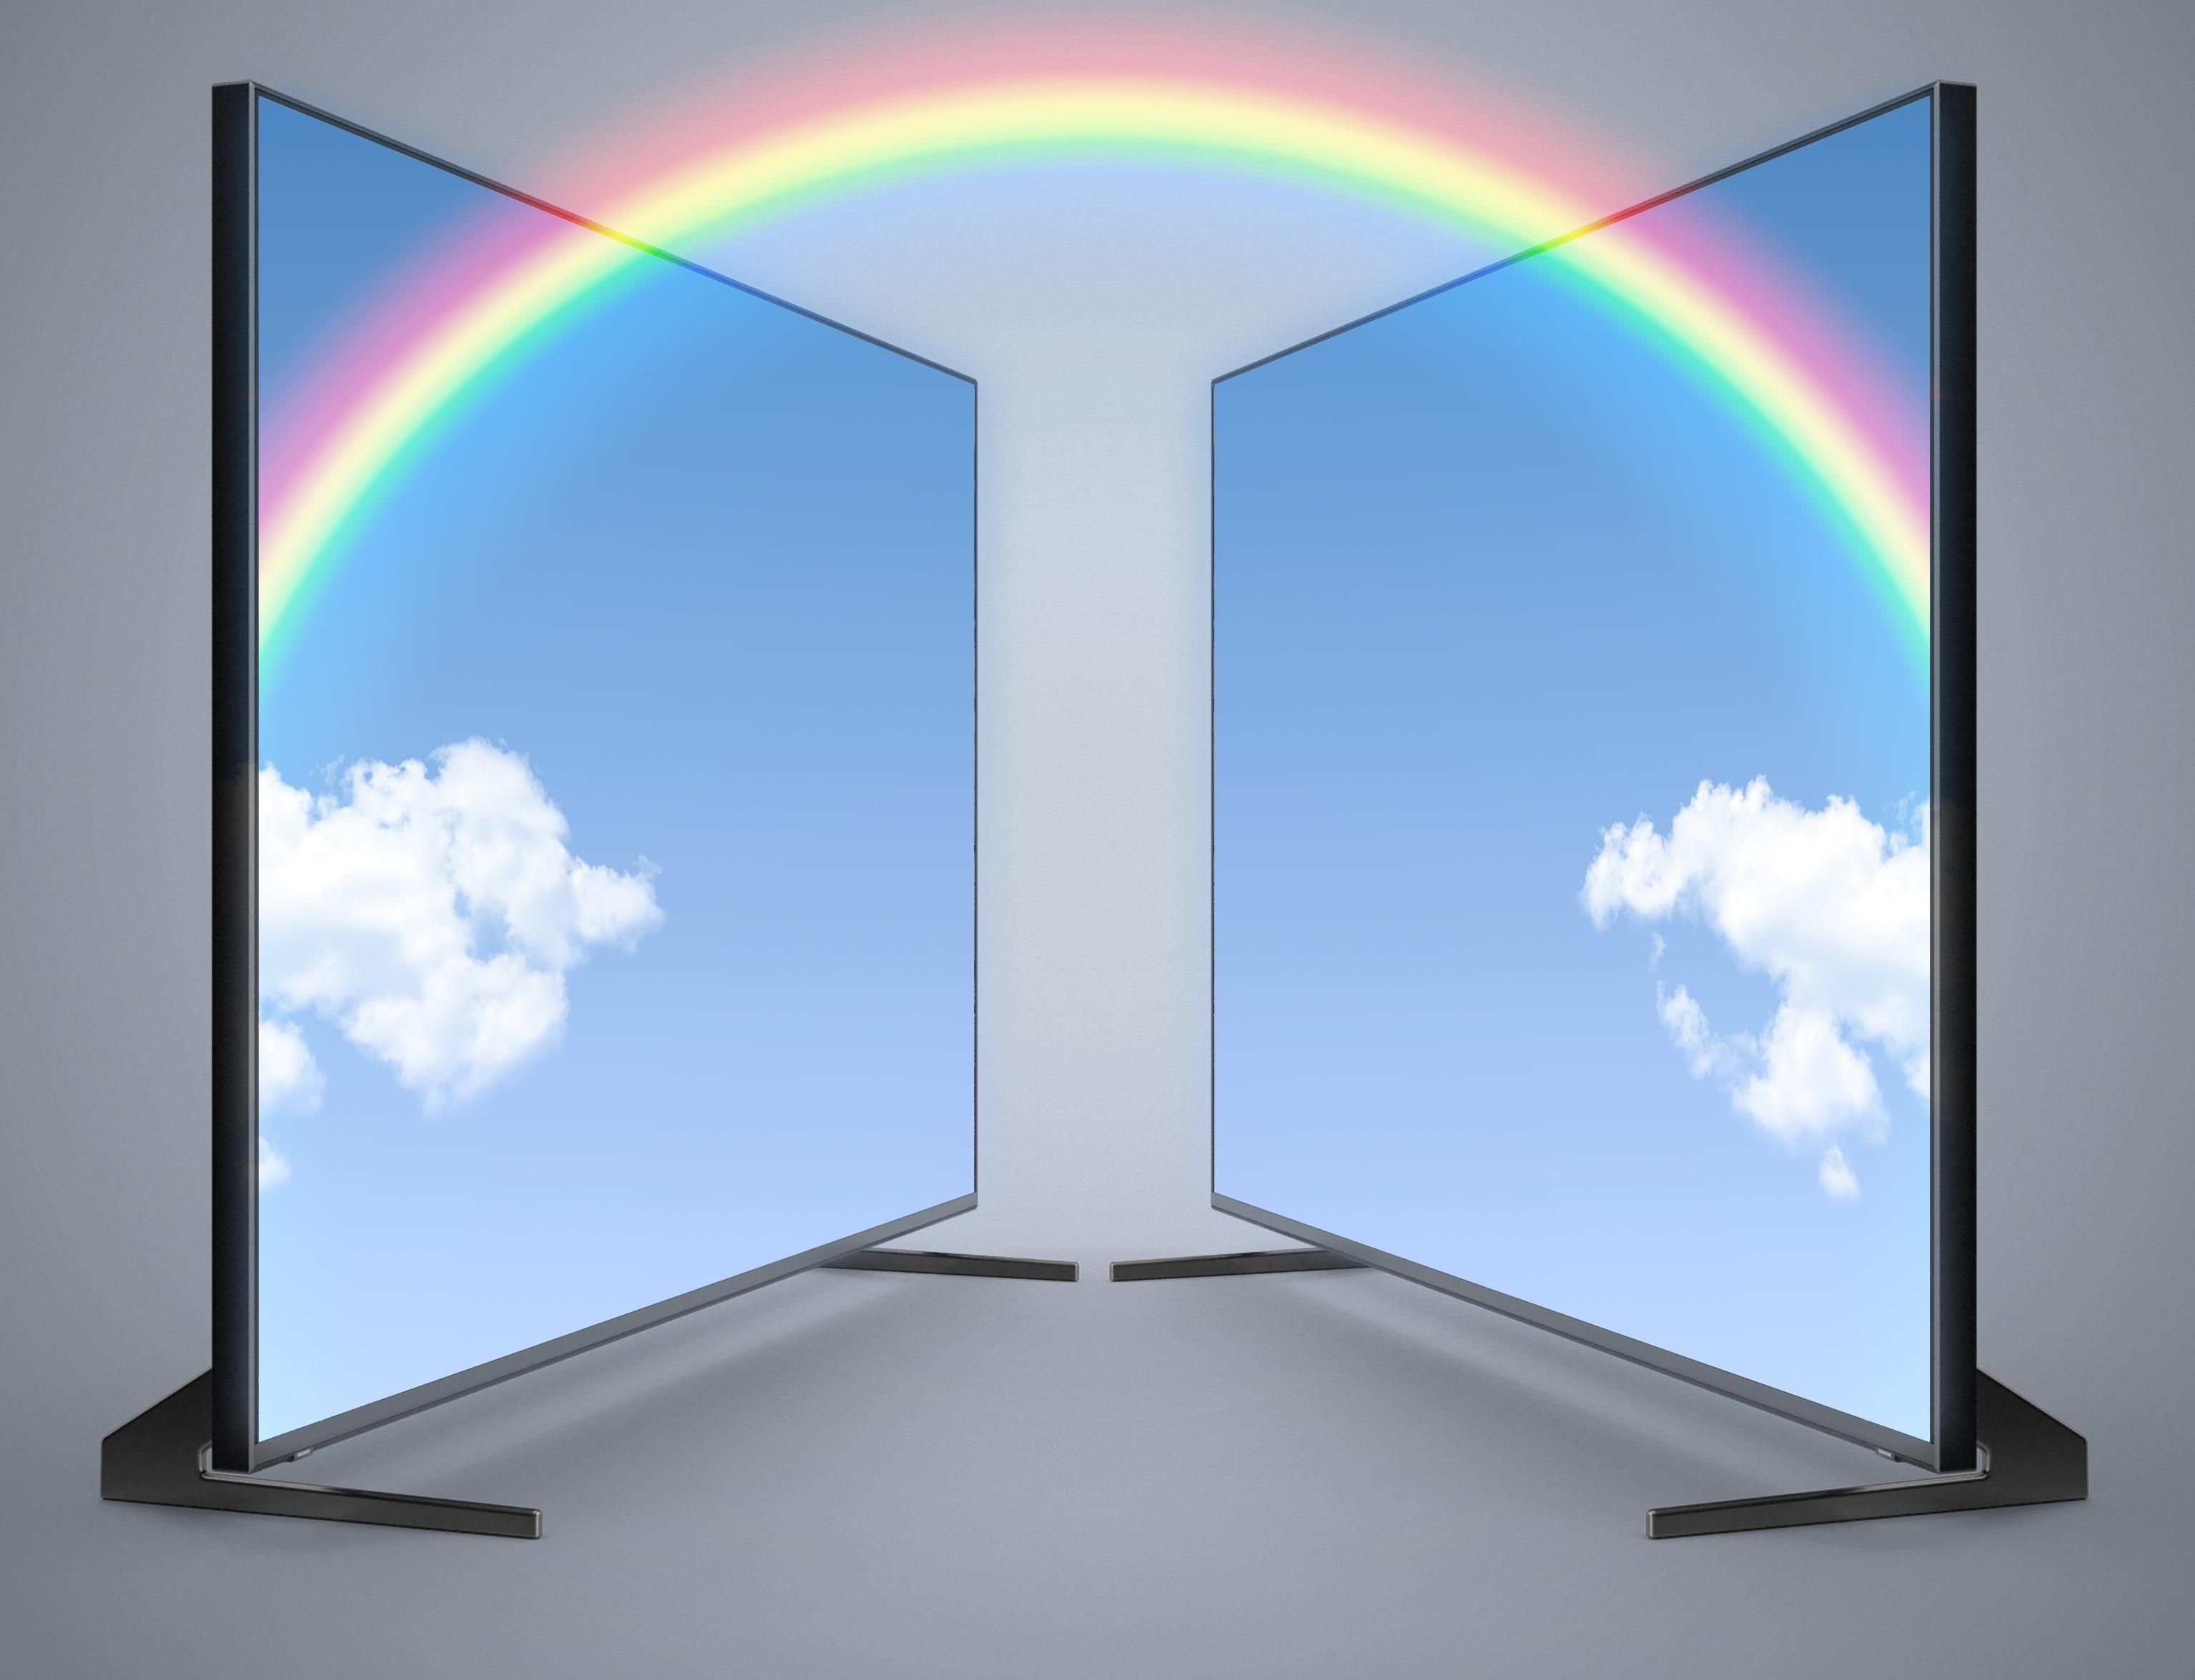 Photo illustration of 2 display monitors facing each other connected by a rainbow